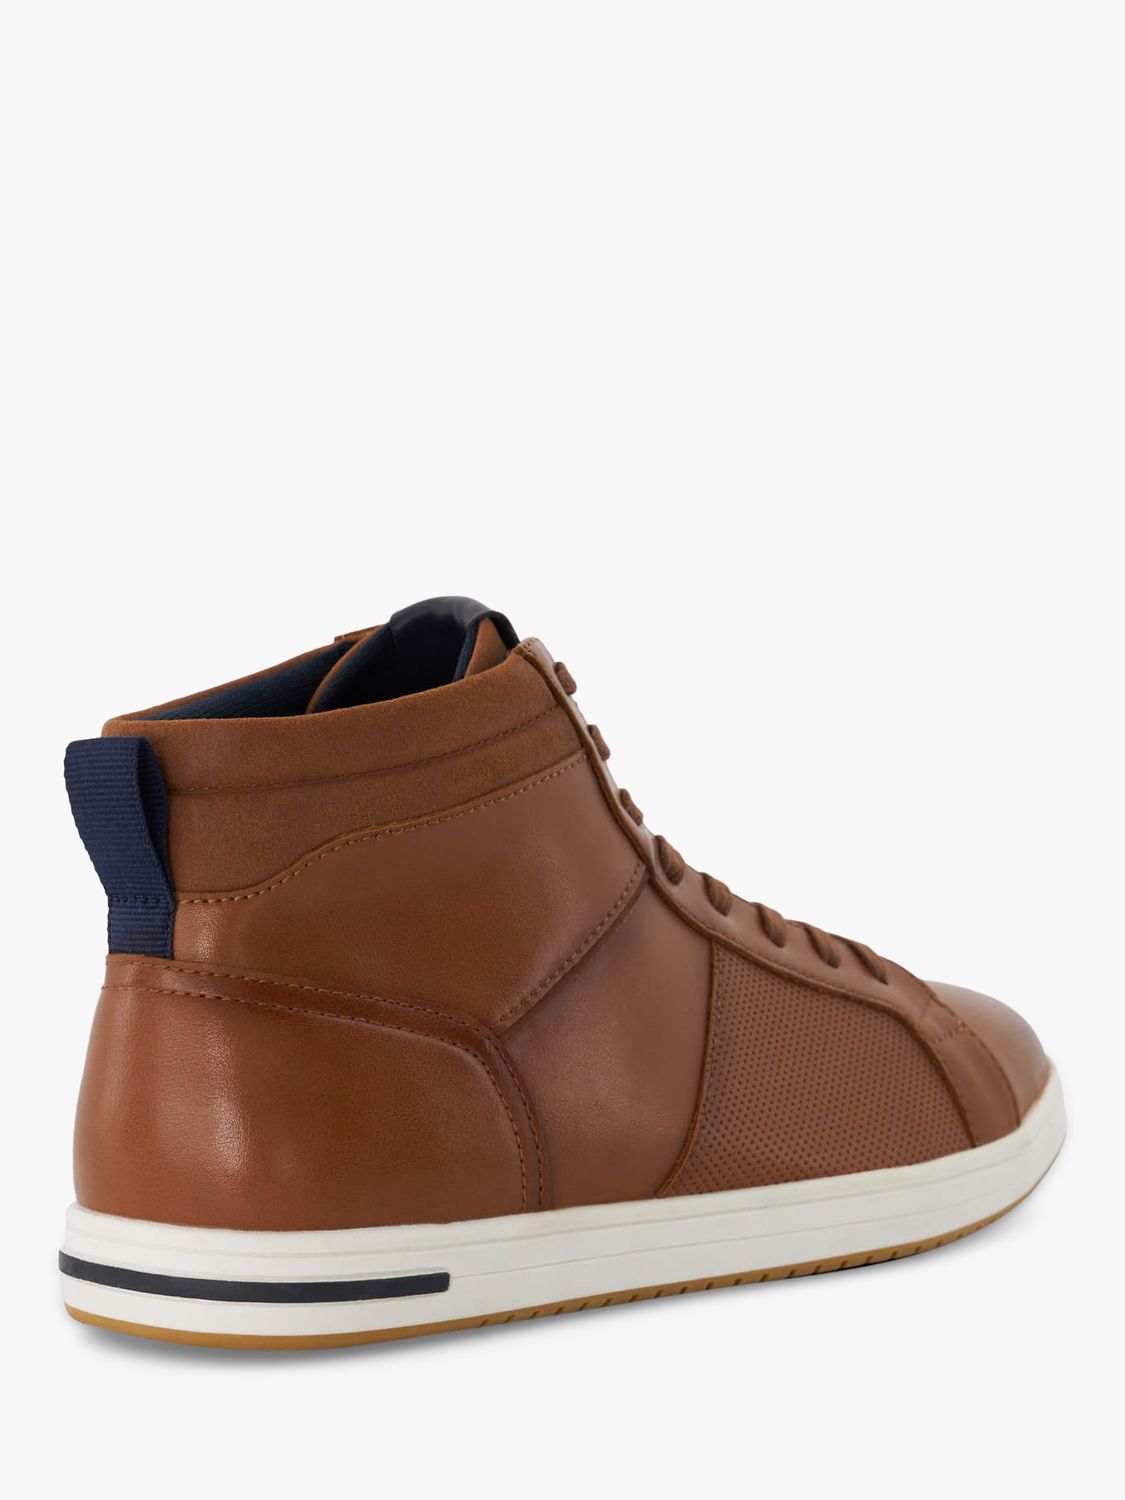 Dune Sezzy Synthetic High-Top Trainers, Tan, EU40